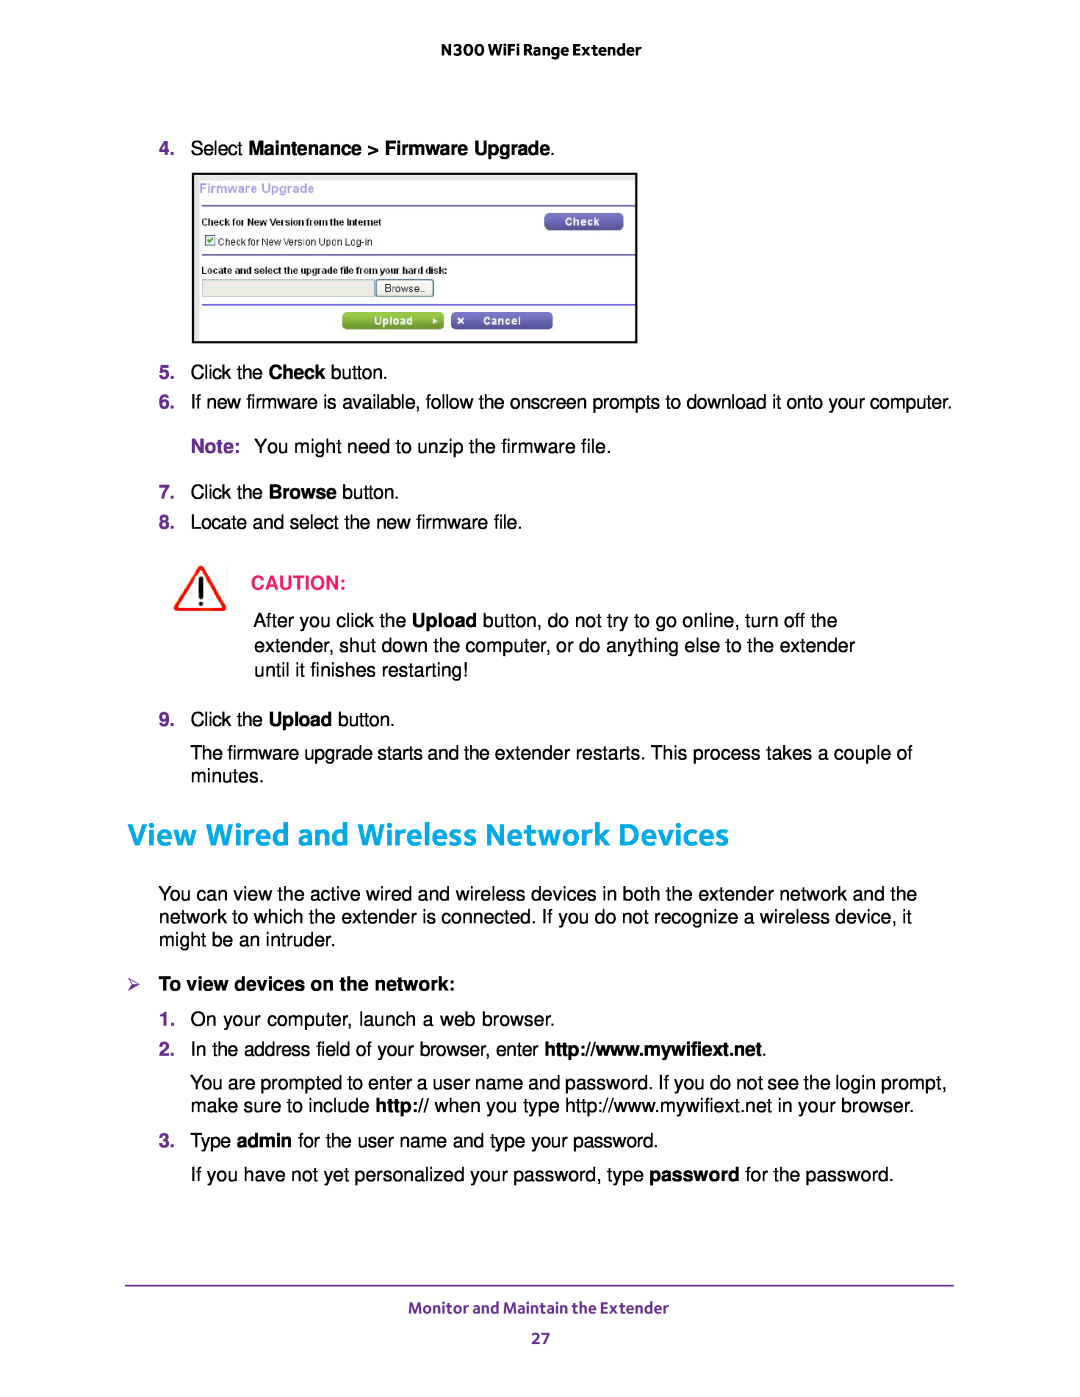 NETGEAR EX2700 user manual View Wired and Wireless Network Devices, Select Maintenance Firmware Upgrade 